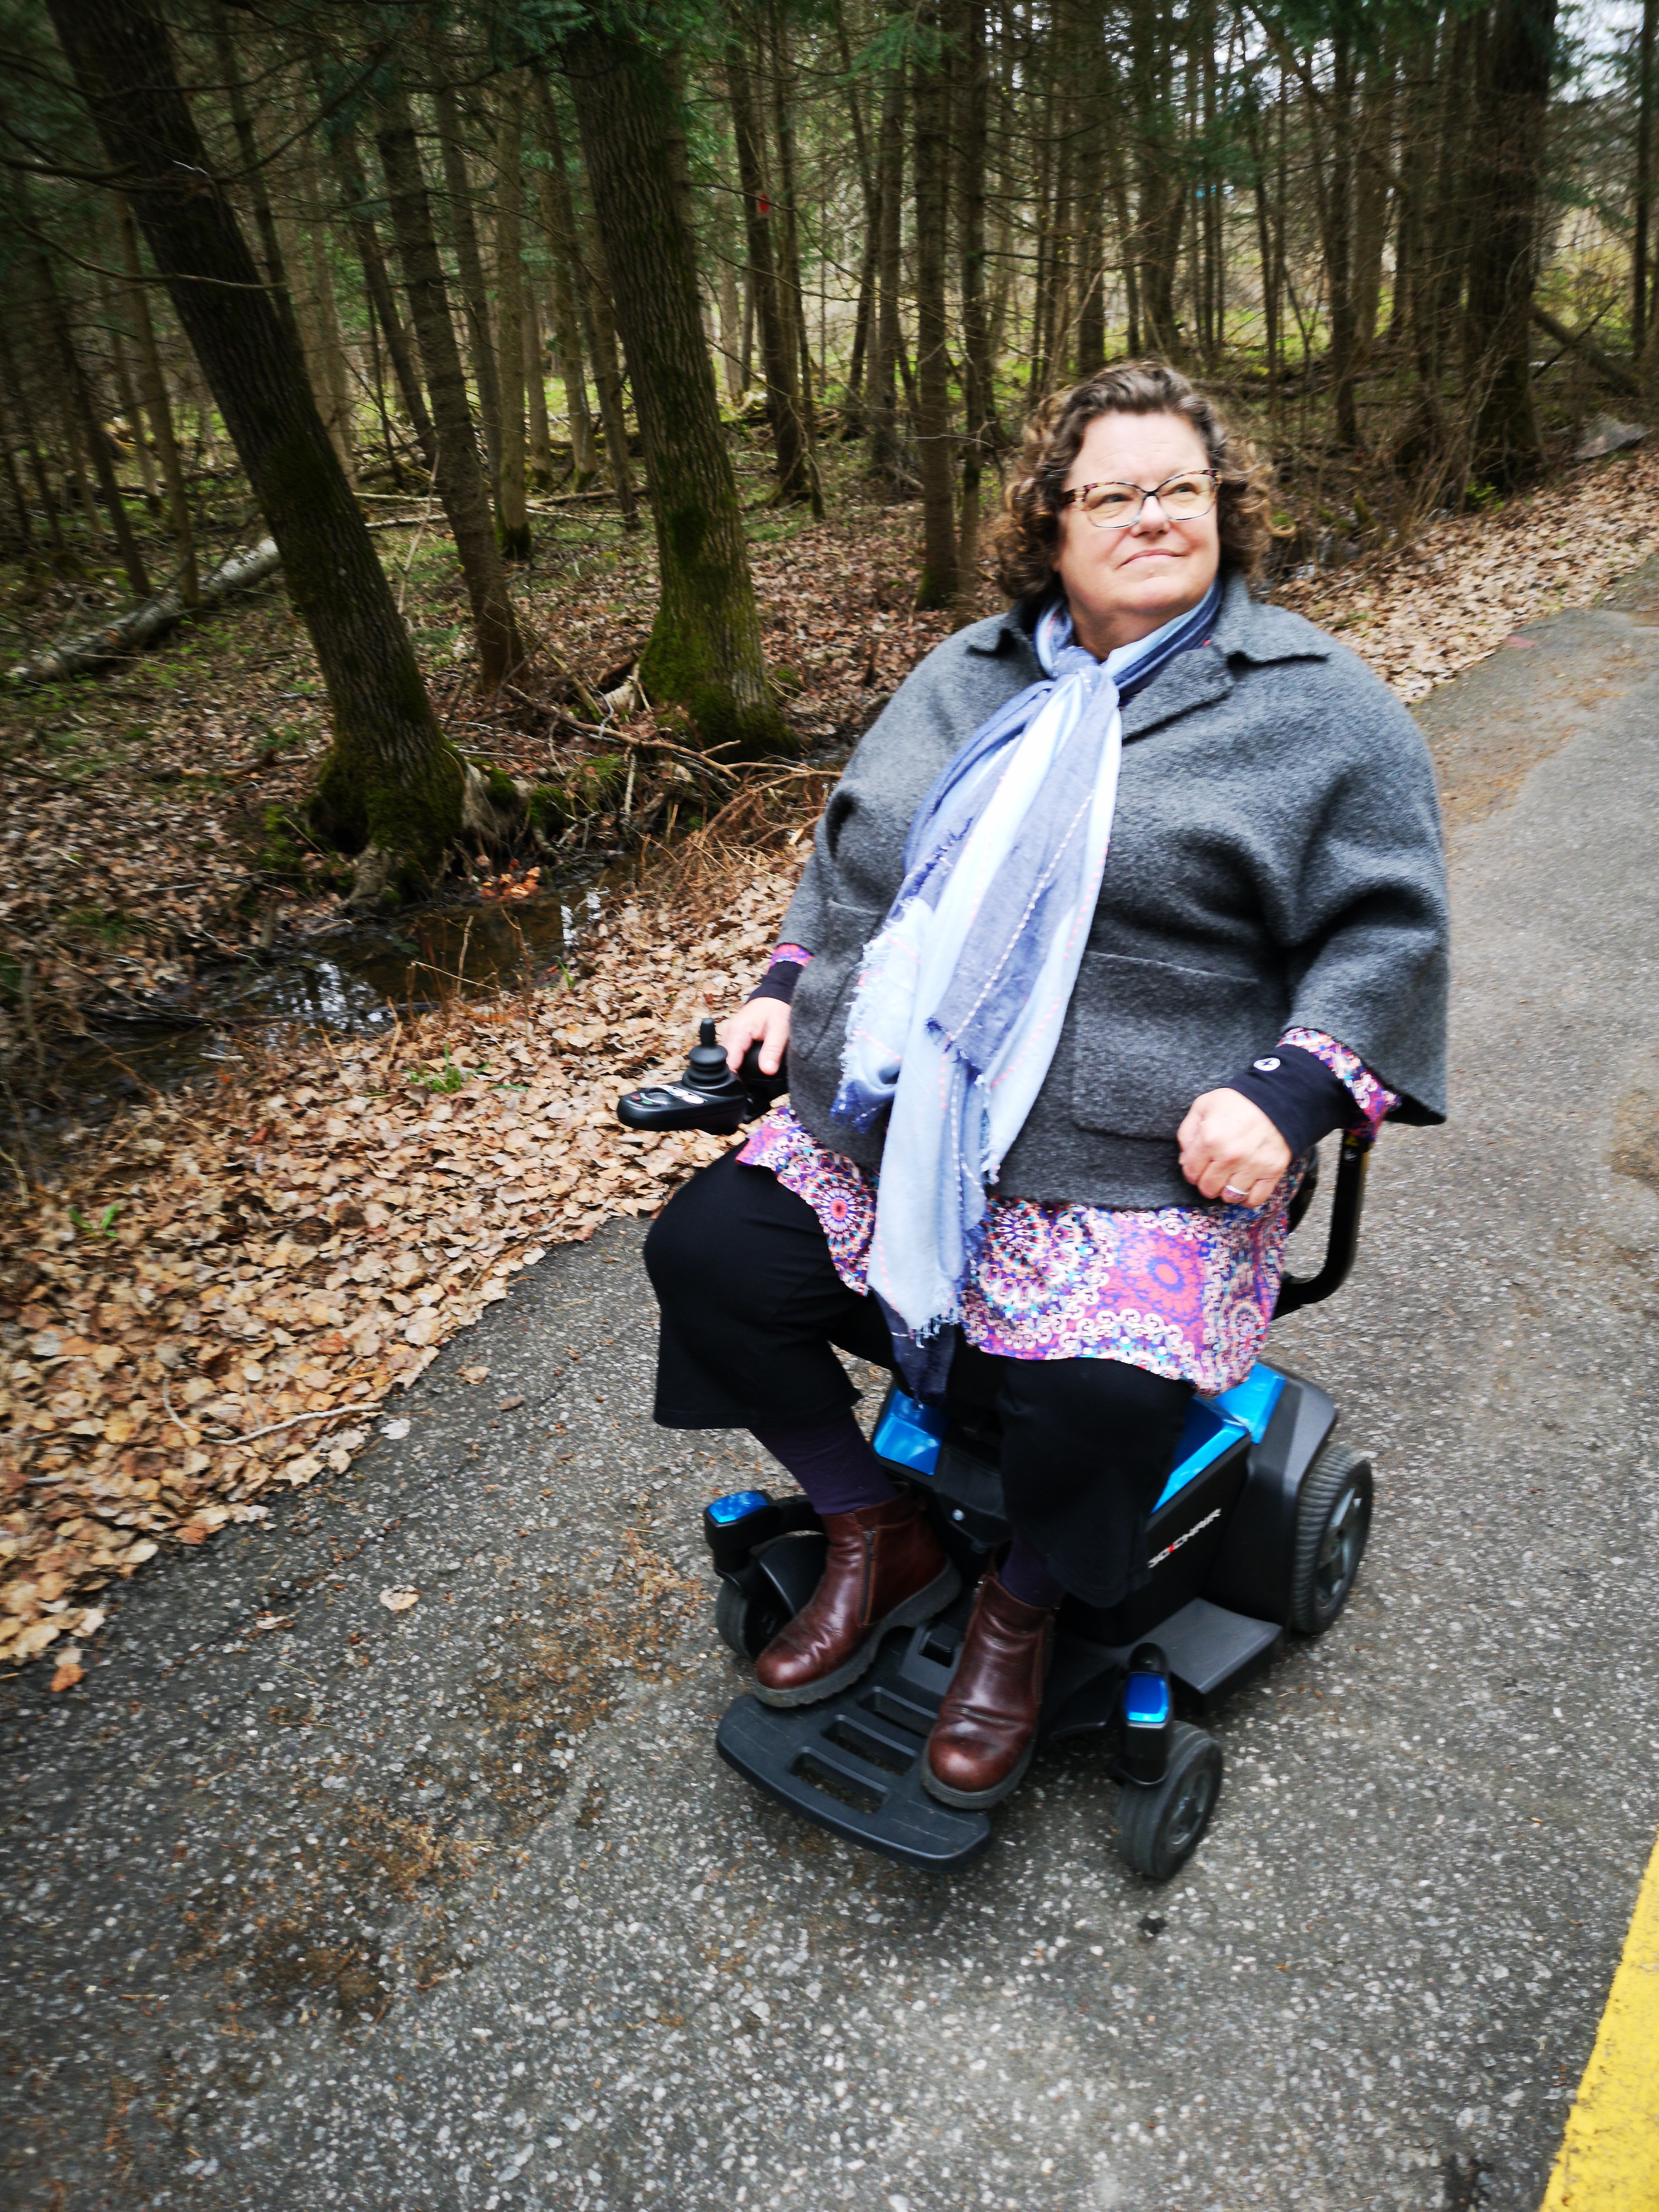 Photograph of Kim Kitchen on a path in a forest.  Kim is a white woman with medium length curly brown hair. Kim is wearing grey sweater over a colourful shirt, black pants and brown boots. Kim uses a scooter that is blue and black